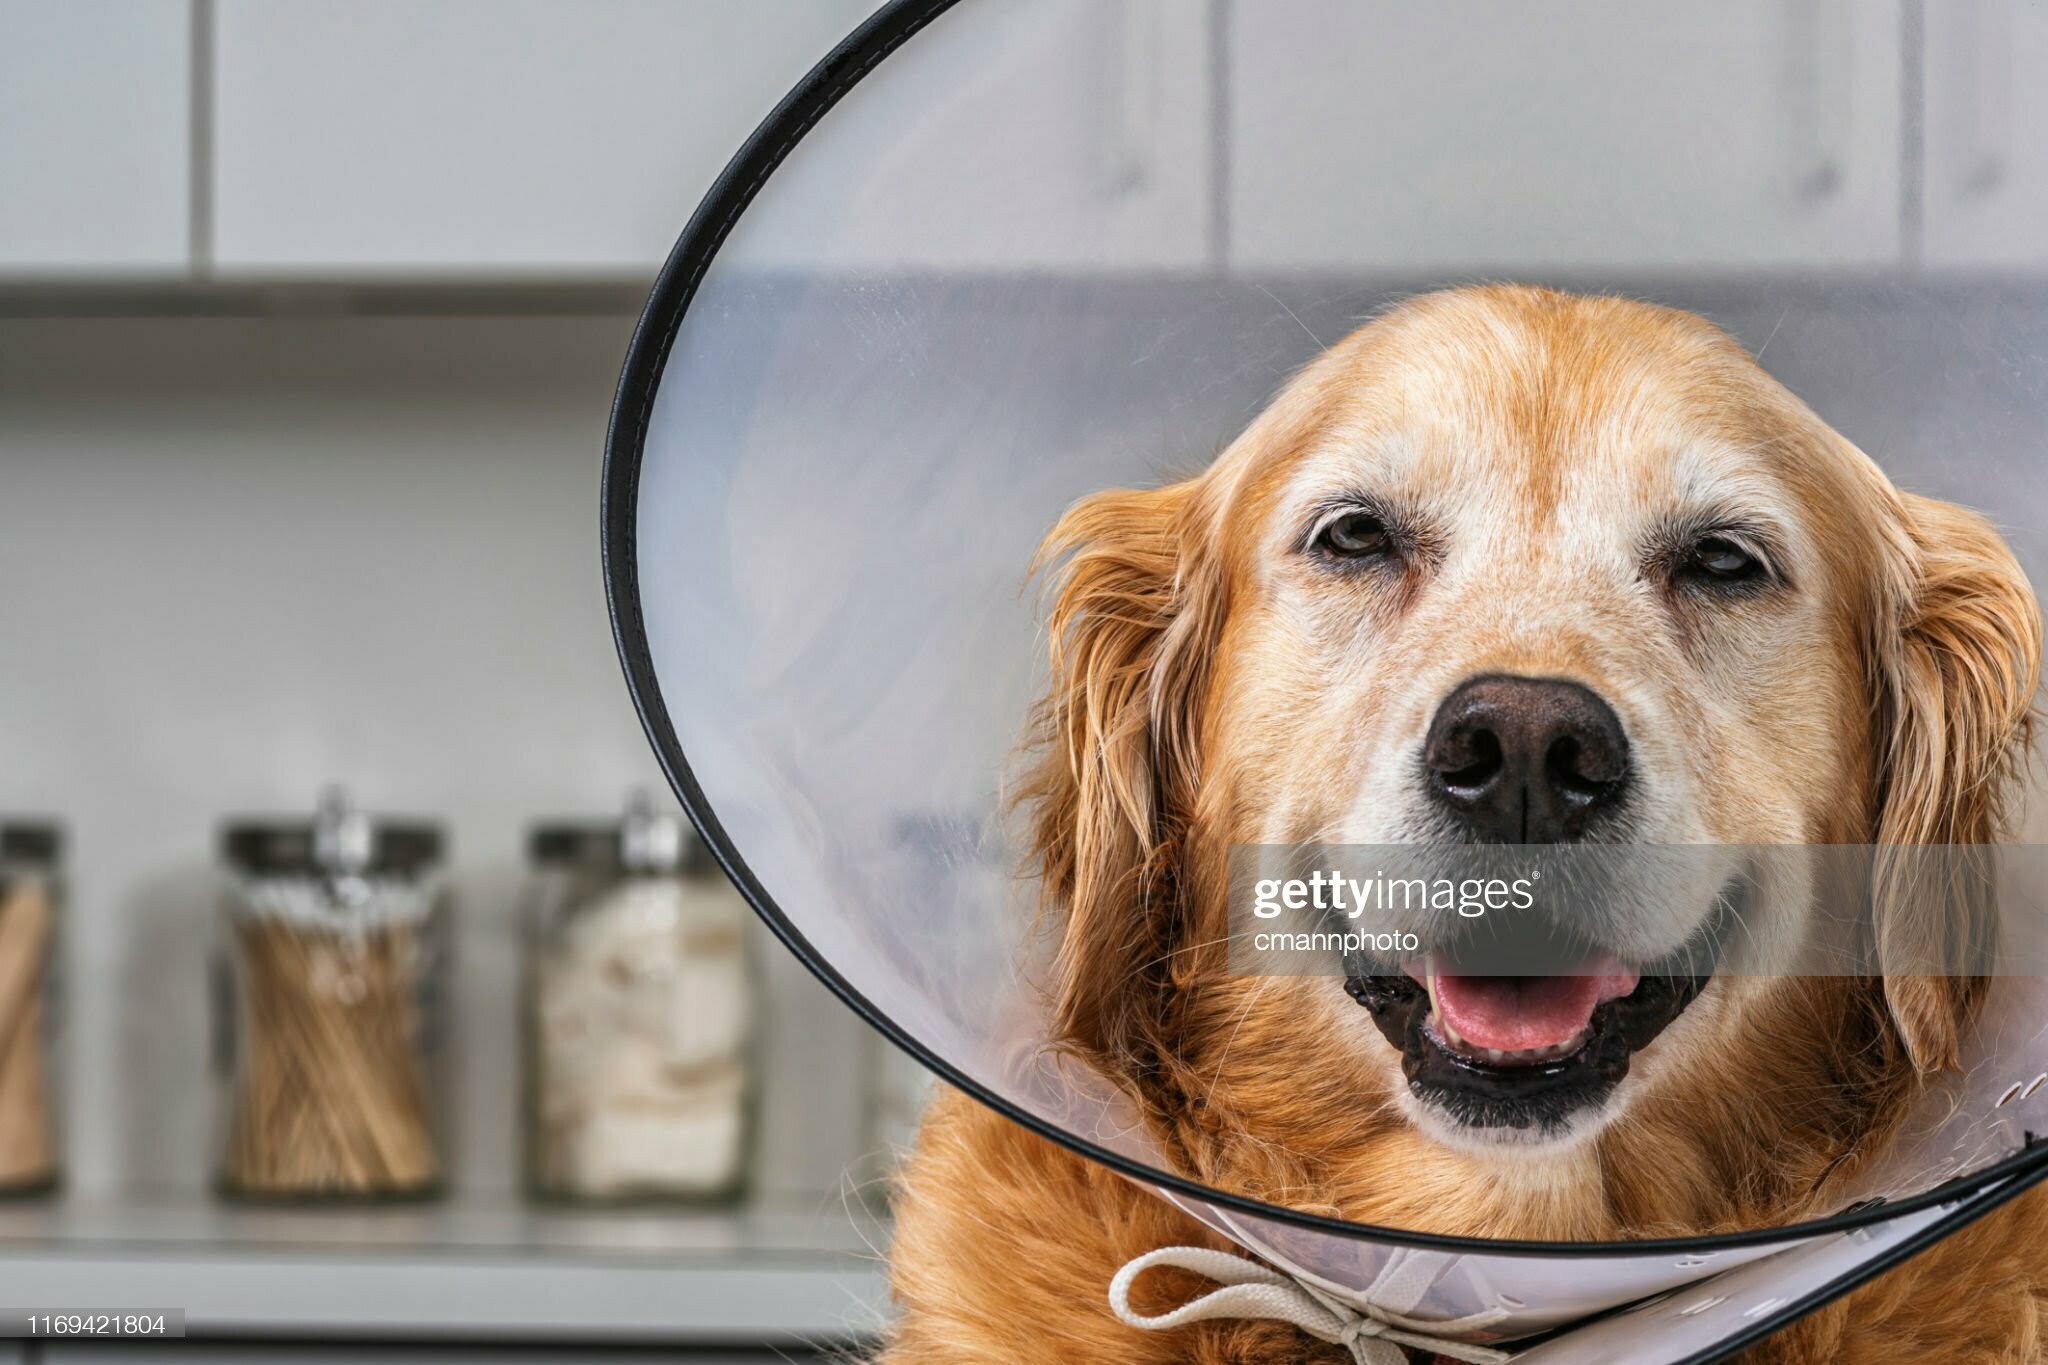 A 9 year old Golden Retriever wearing a plastic “Cone of Shame”, aka E-Collar, looking at the camera as she is lying down on a white examination table of a veterinary hospital. The Elizabethan collar, more commonly know as an E-collar or the “Cone of shame” is used to prevent dogs and cats as well as other animals from licking a wound or surgical incision, giving it time to heal.